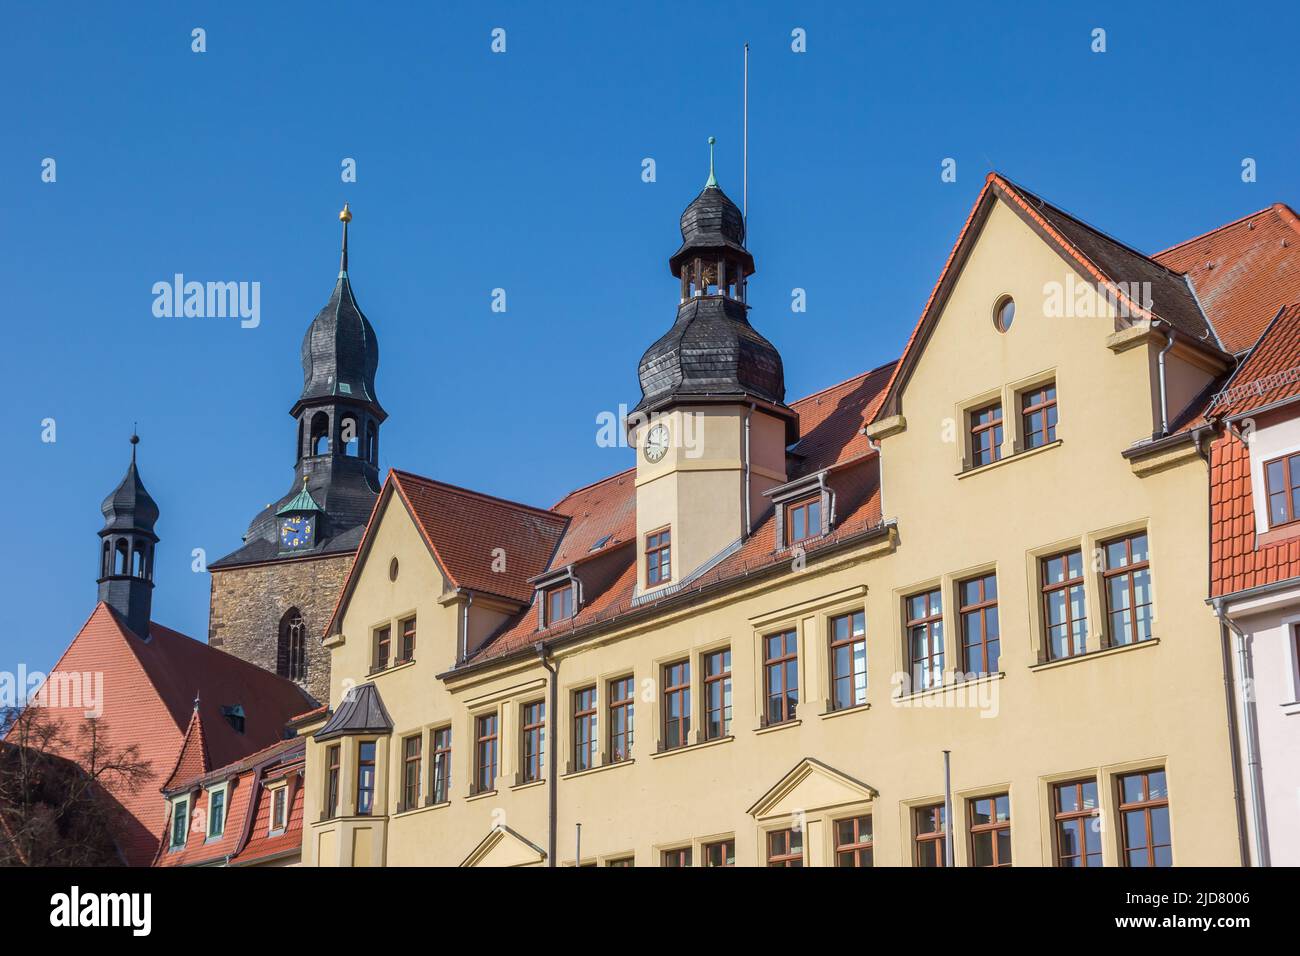 Towers of the town hall and Jacobi church in Hettstedt, Germany Stock Photo